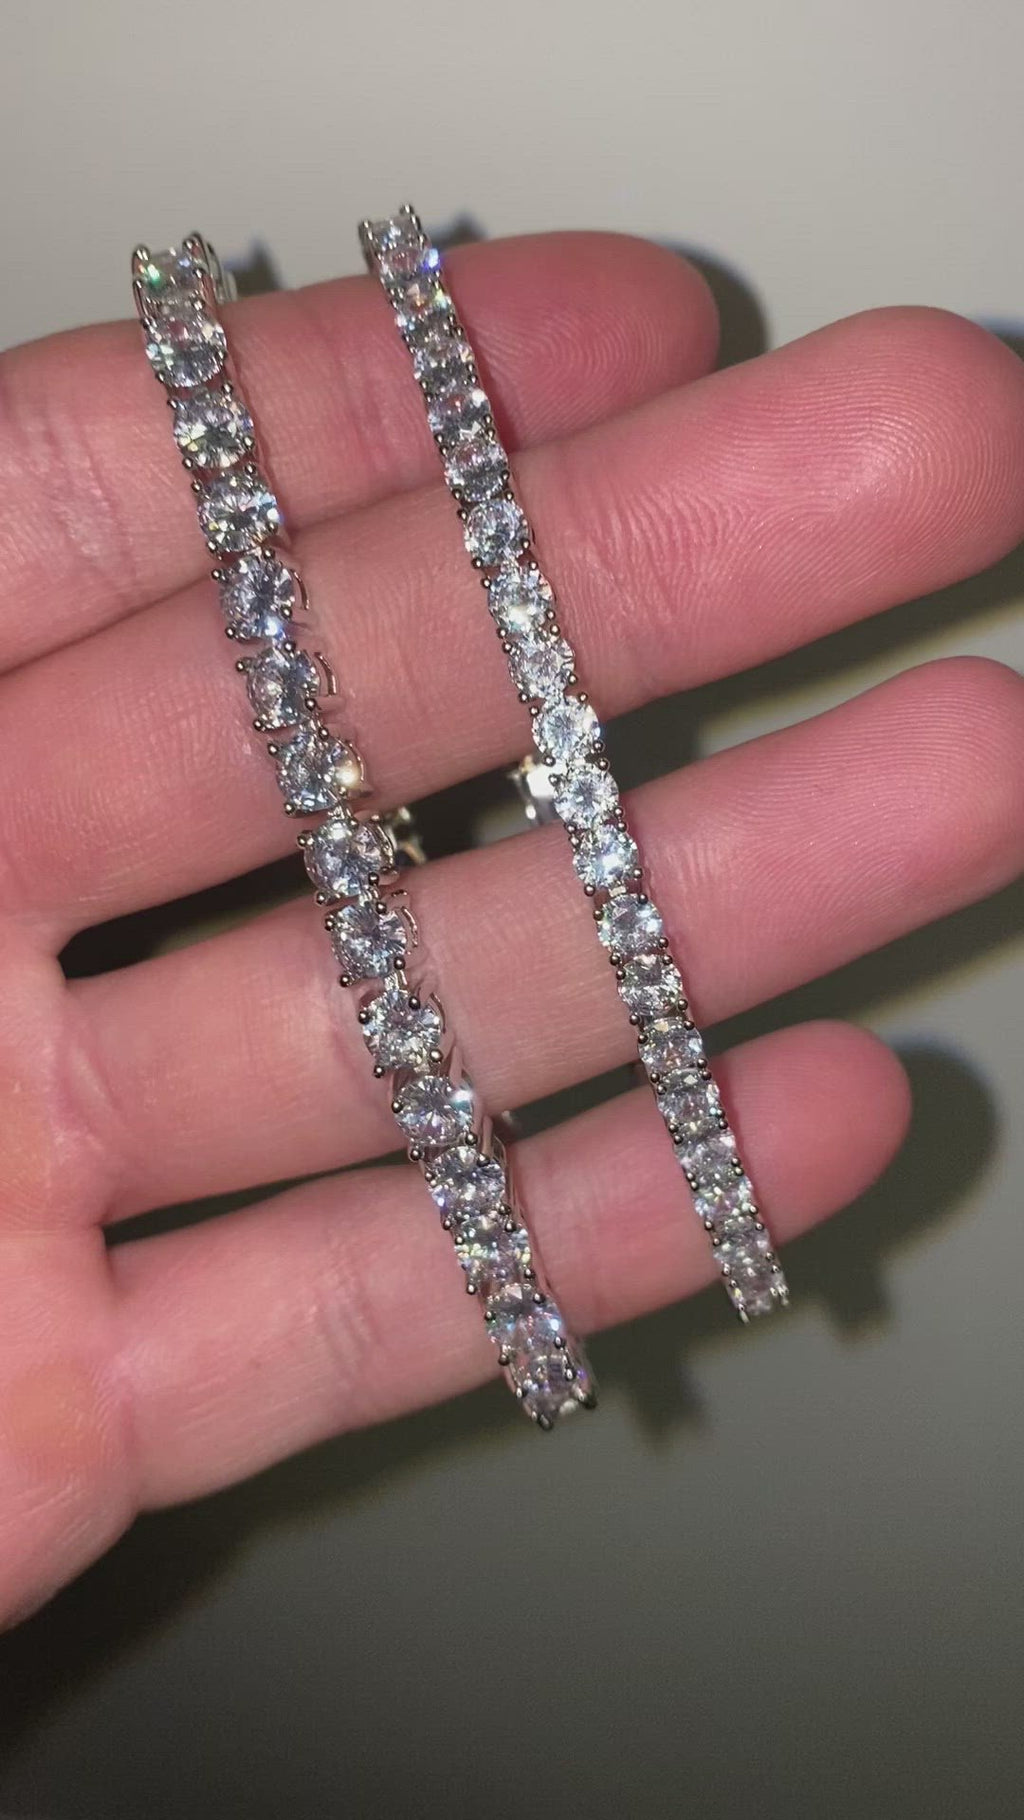 Video showing the Tennis bracelet 4mm in stainless steel. With cubic zirconia stones. Like diamonds